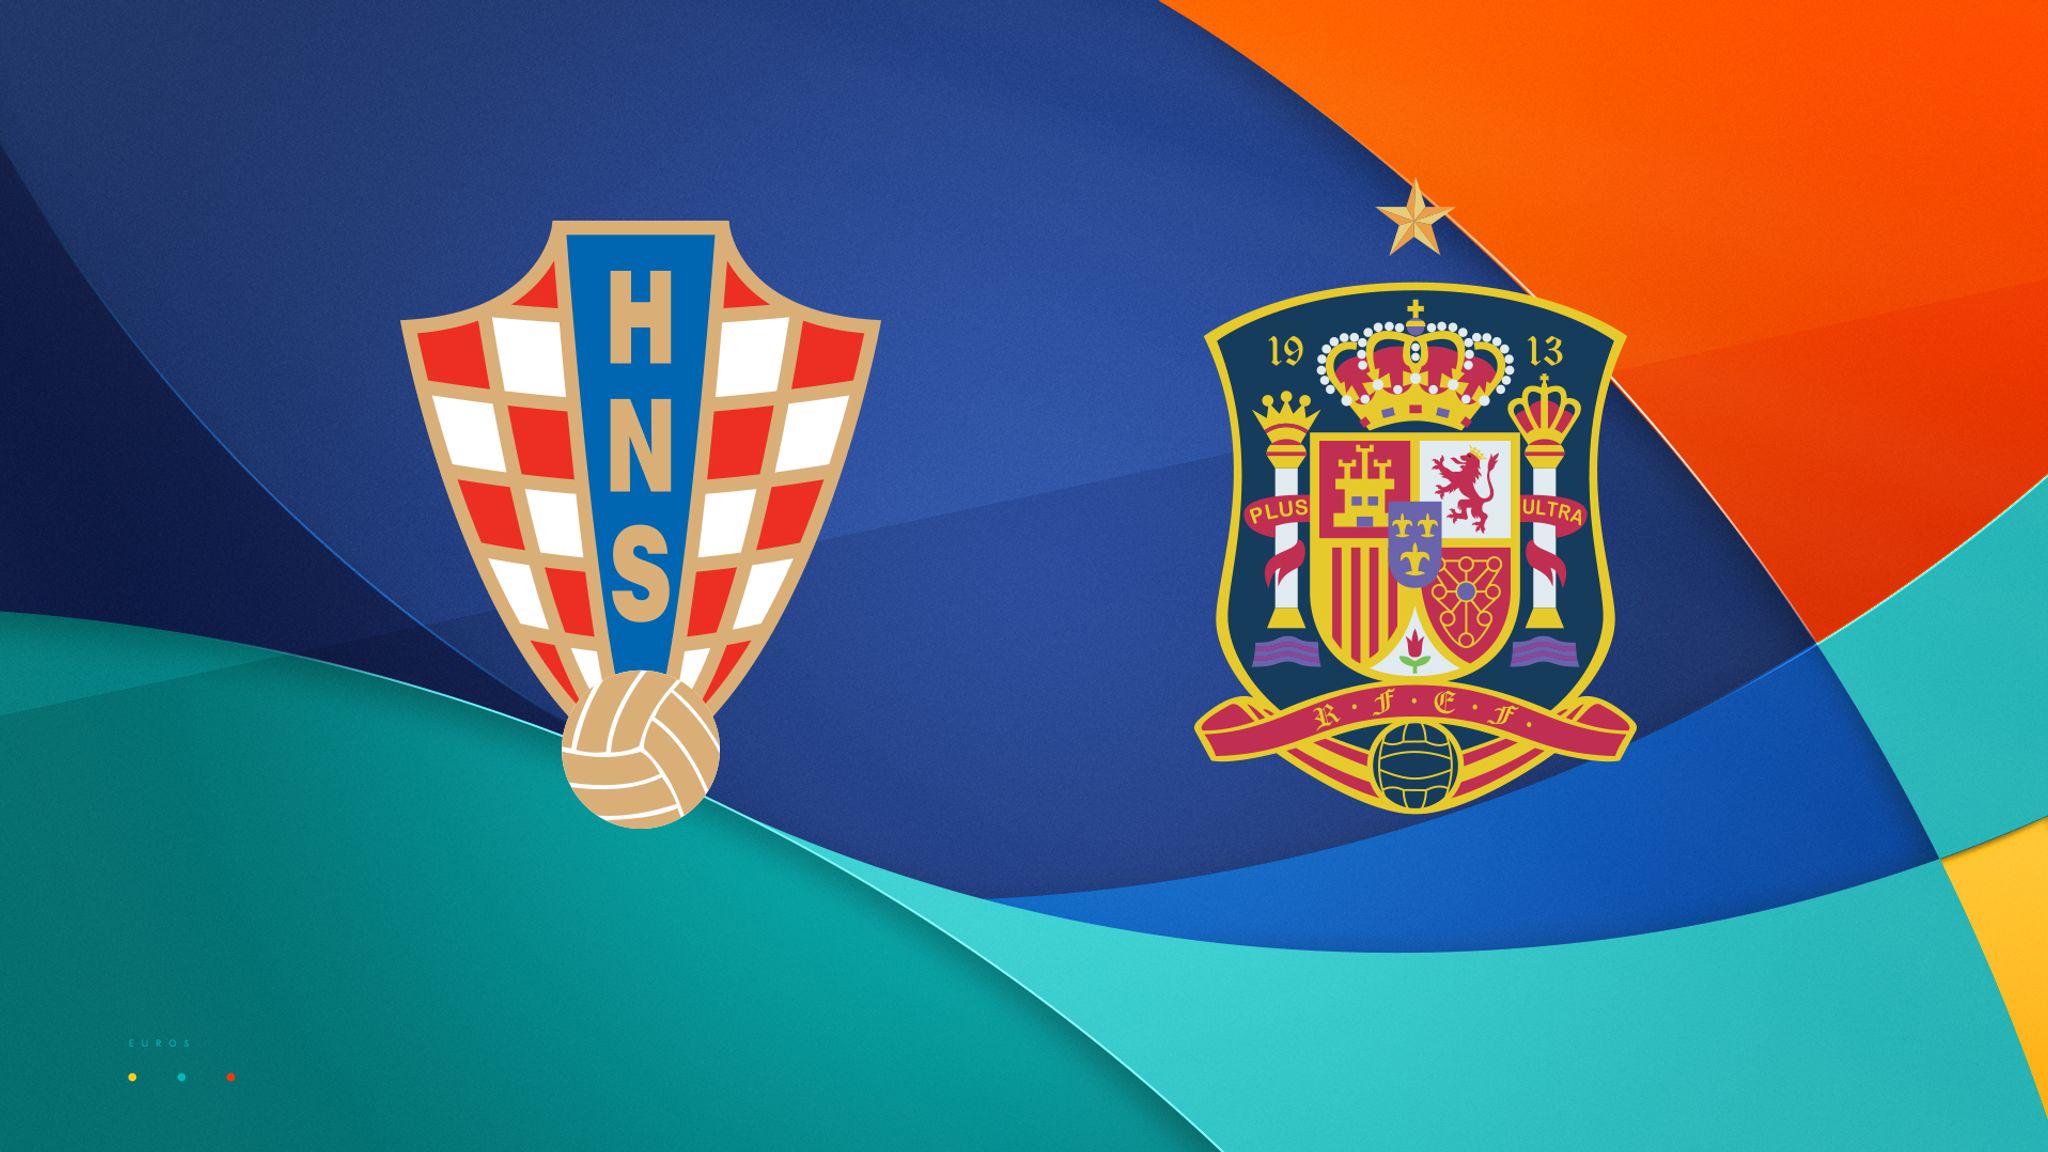 Euro 2020: Croatia vs Spain - follow live in-play action and stats | FPL360